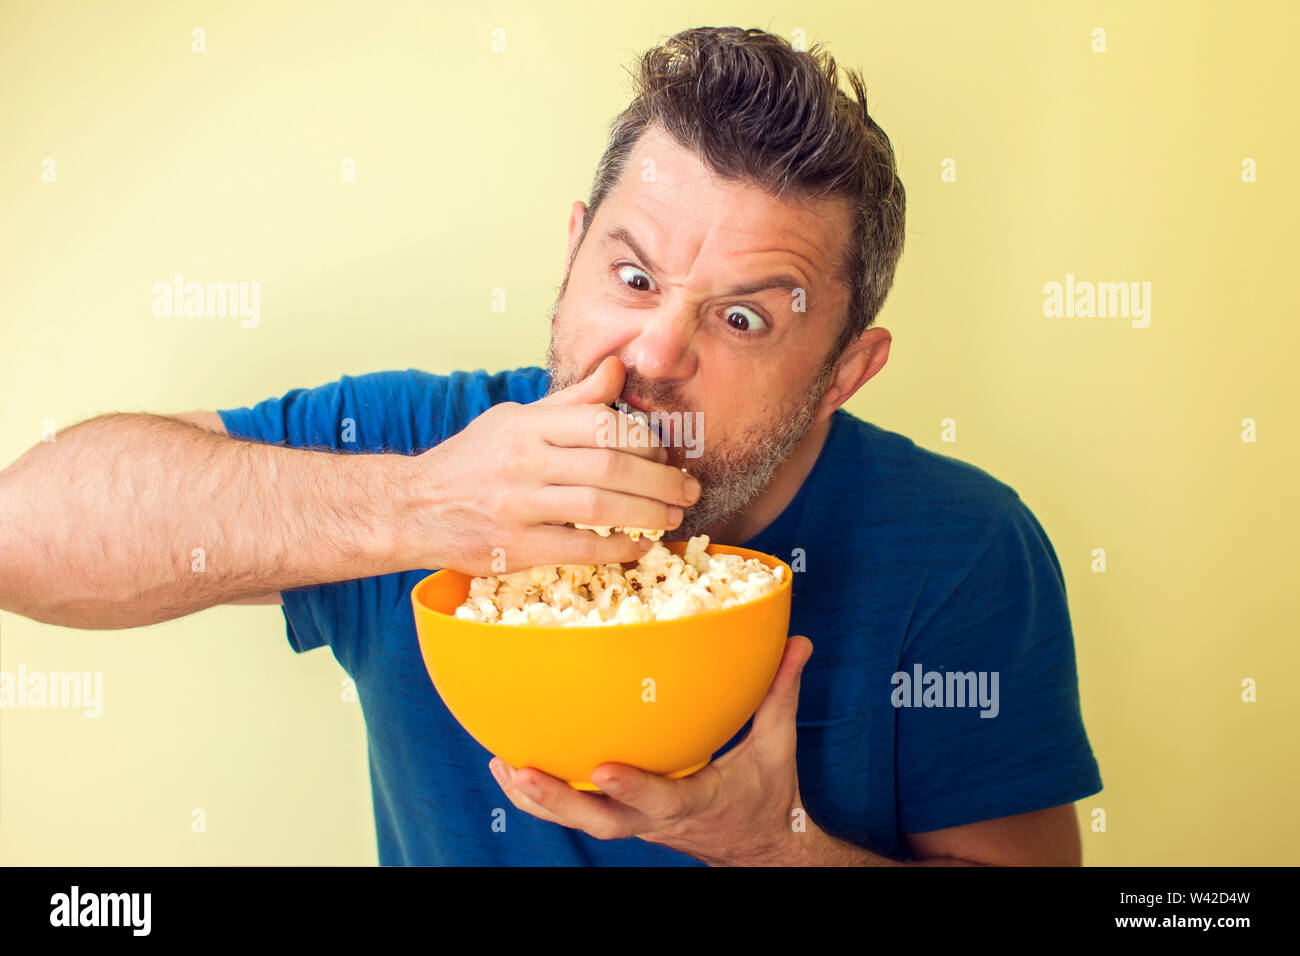 Portrait of a funny man eating popcorn over yellow background Stock Photo